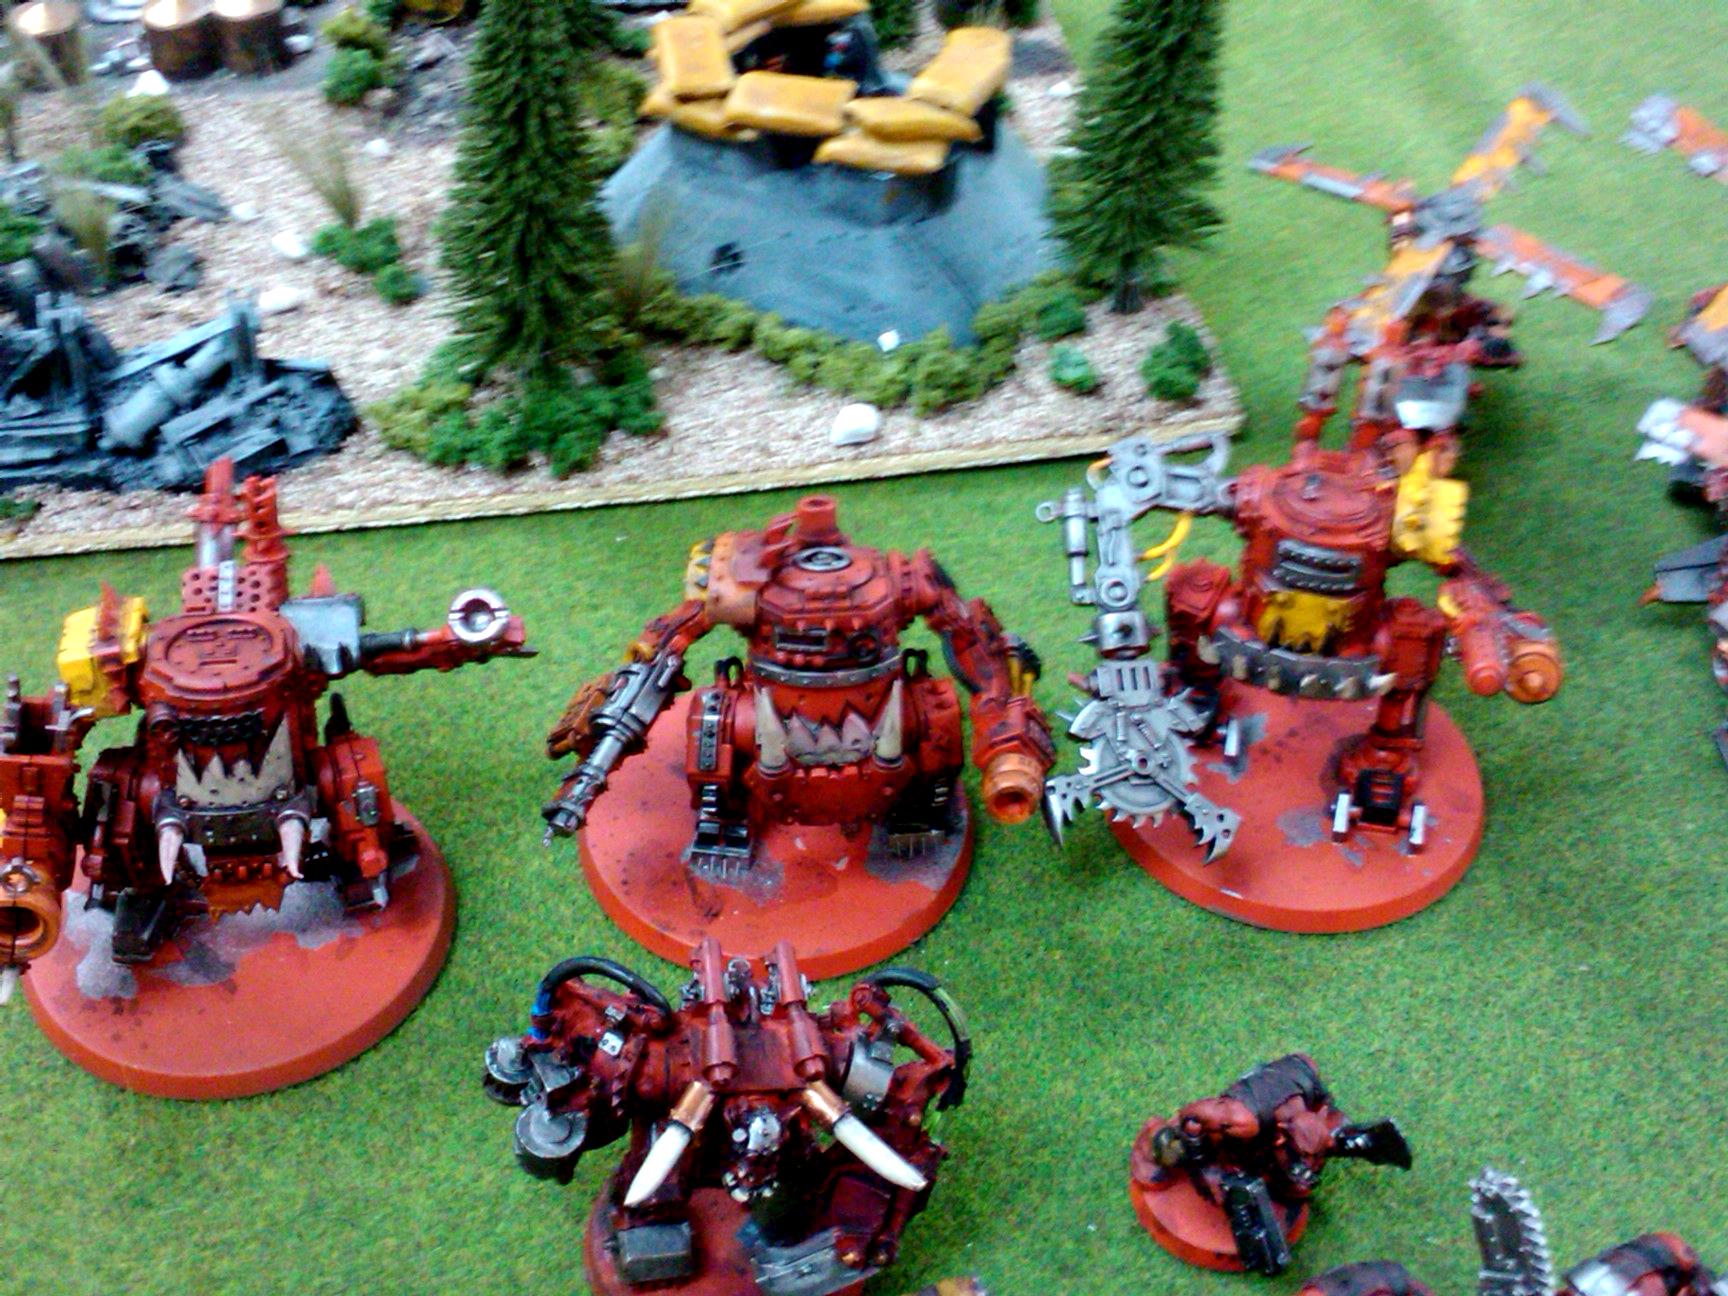 Commission, Conversion, Orcs, Ork Army, Orks, Painting, Project, Red, Tankk, Trukk, Waaagh